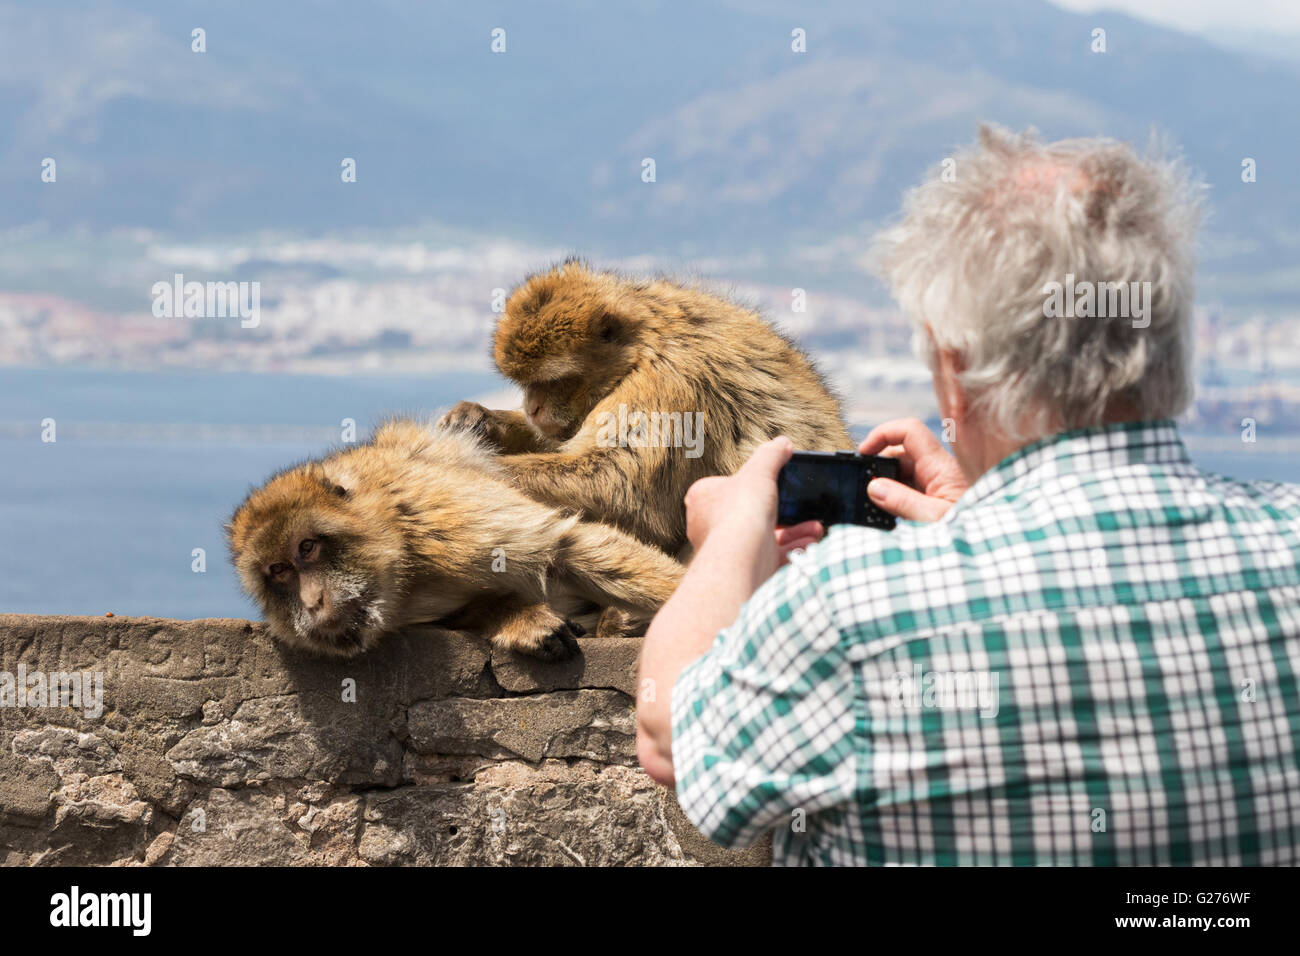 A tourist taking a photo of the Barbary apes, the Rock of Gibraltar, Gibraltar Europe Stock Photo